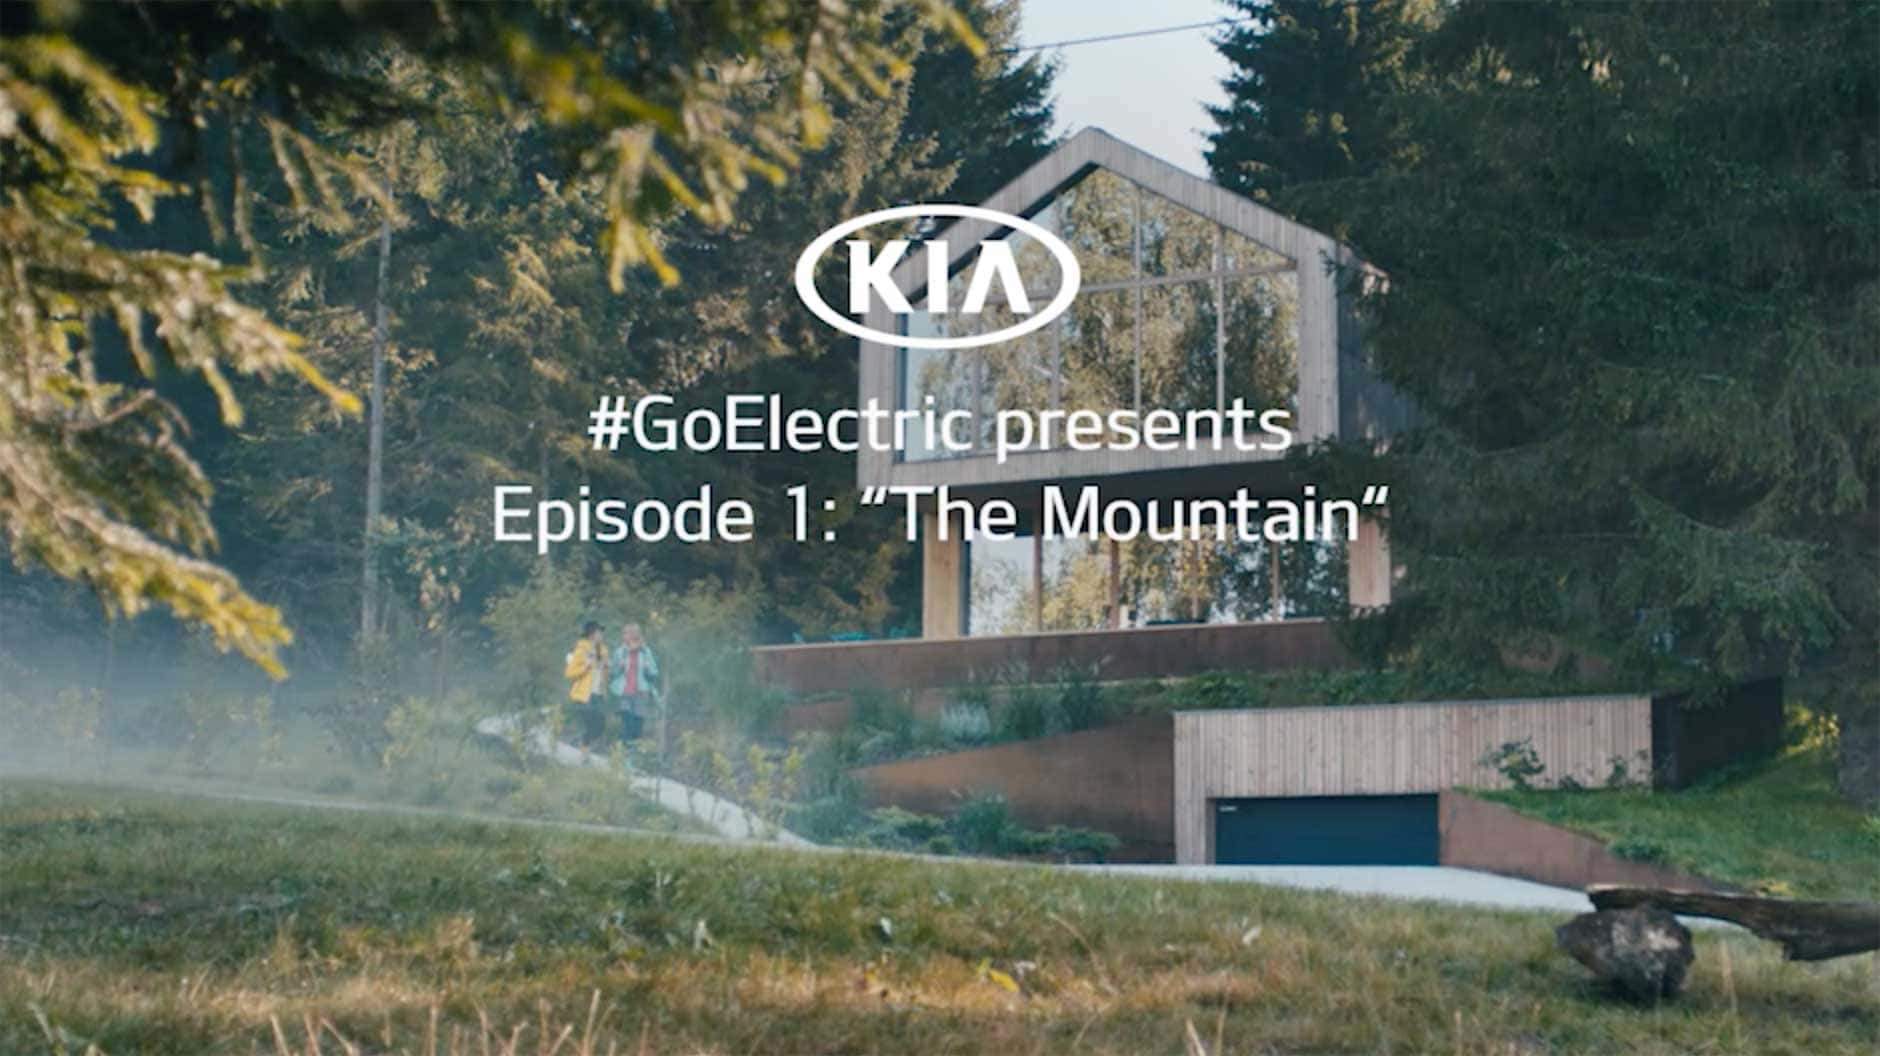 #GoElectric presents Episode 1: "The Mountain"